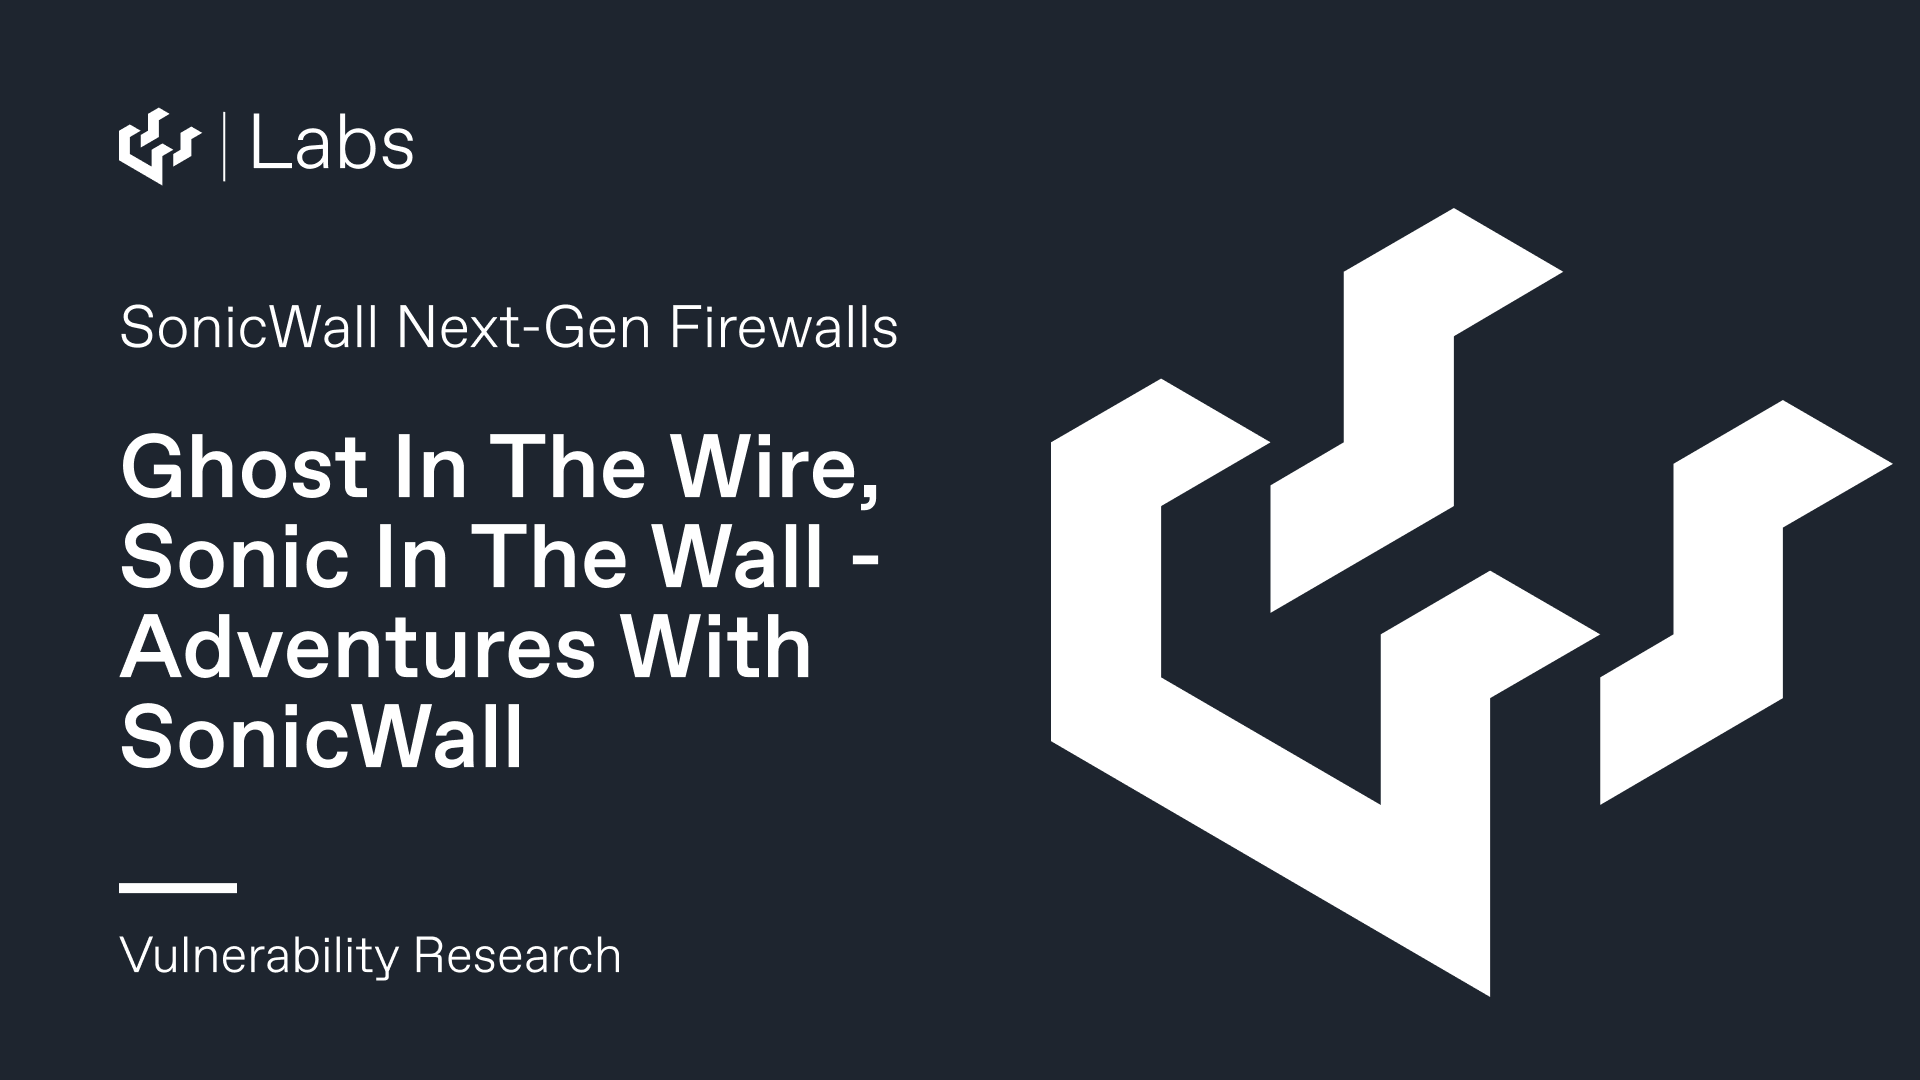 Ghost In The Wire, Sonic In The Wall - Adventures With SonicWall